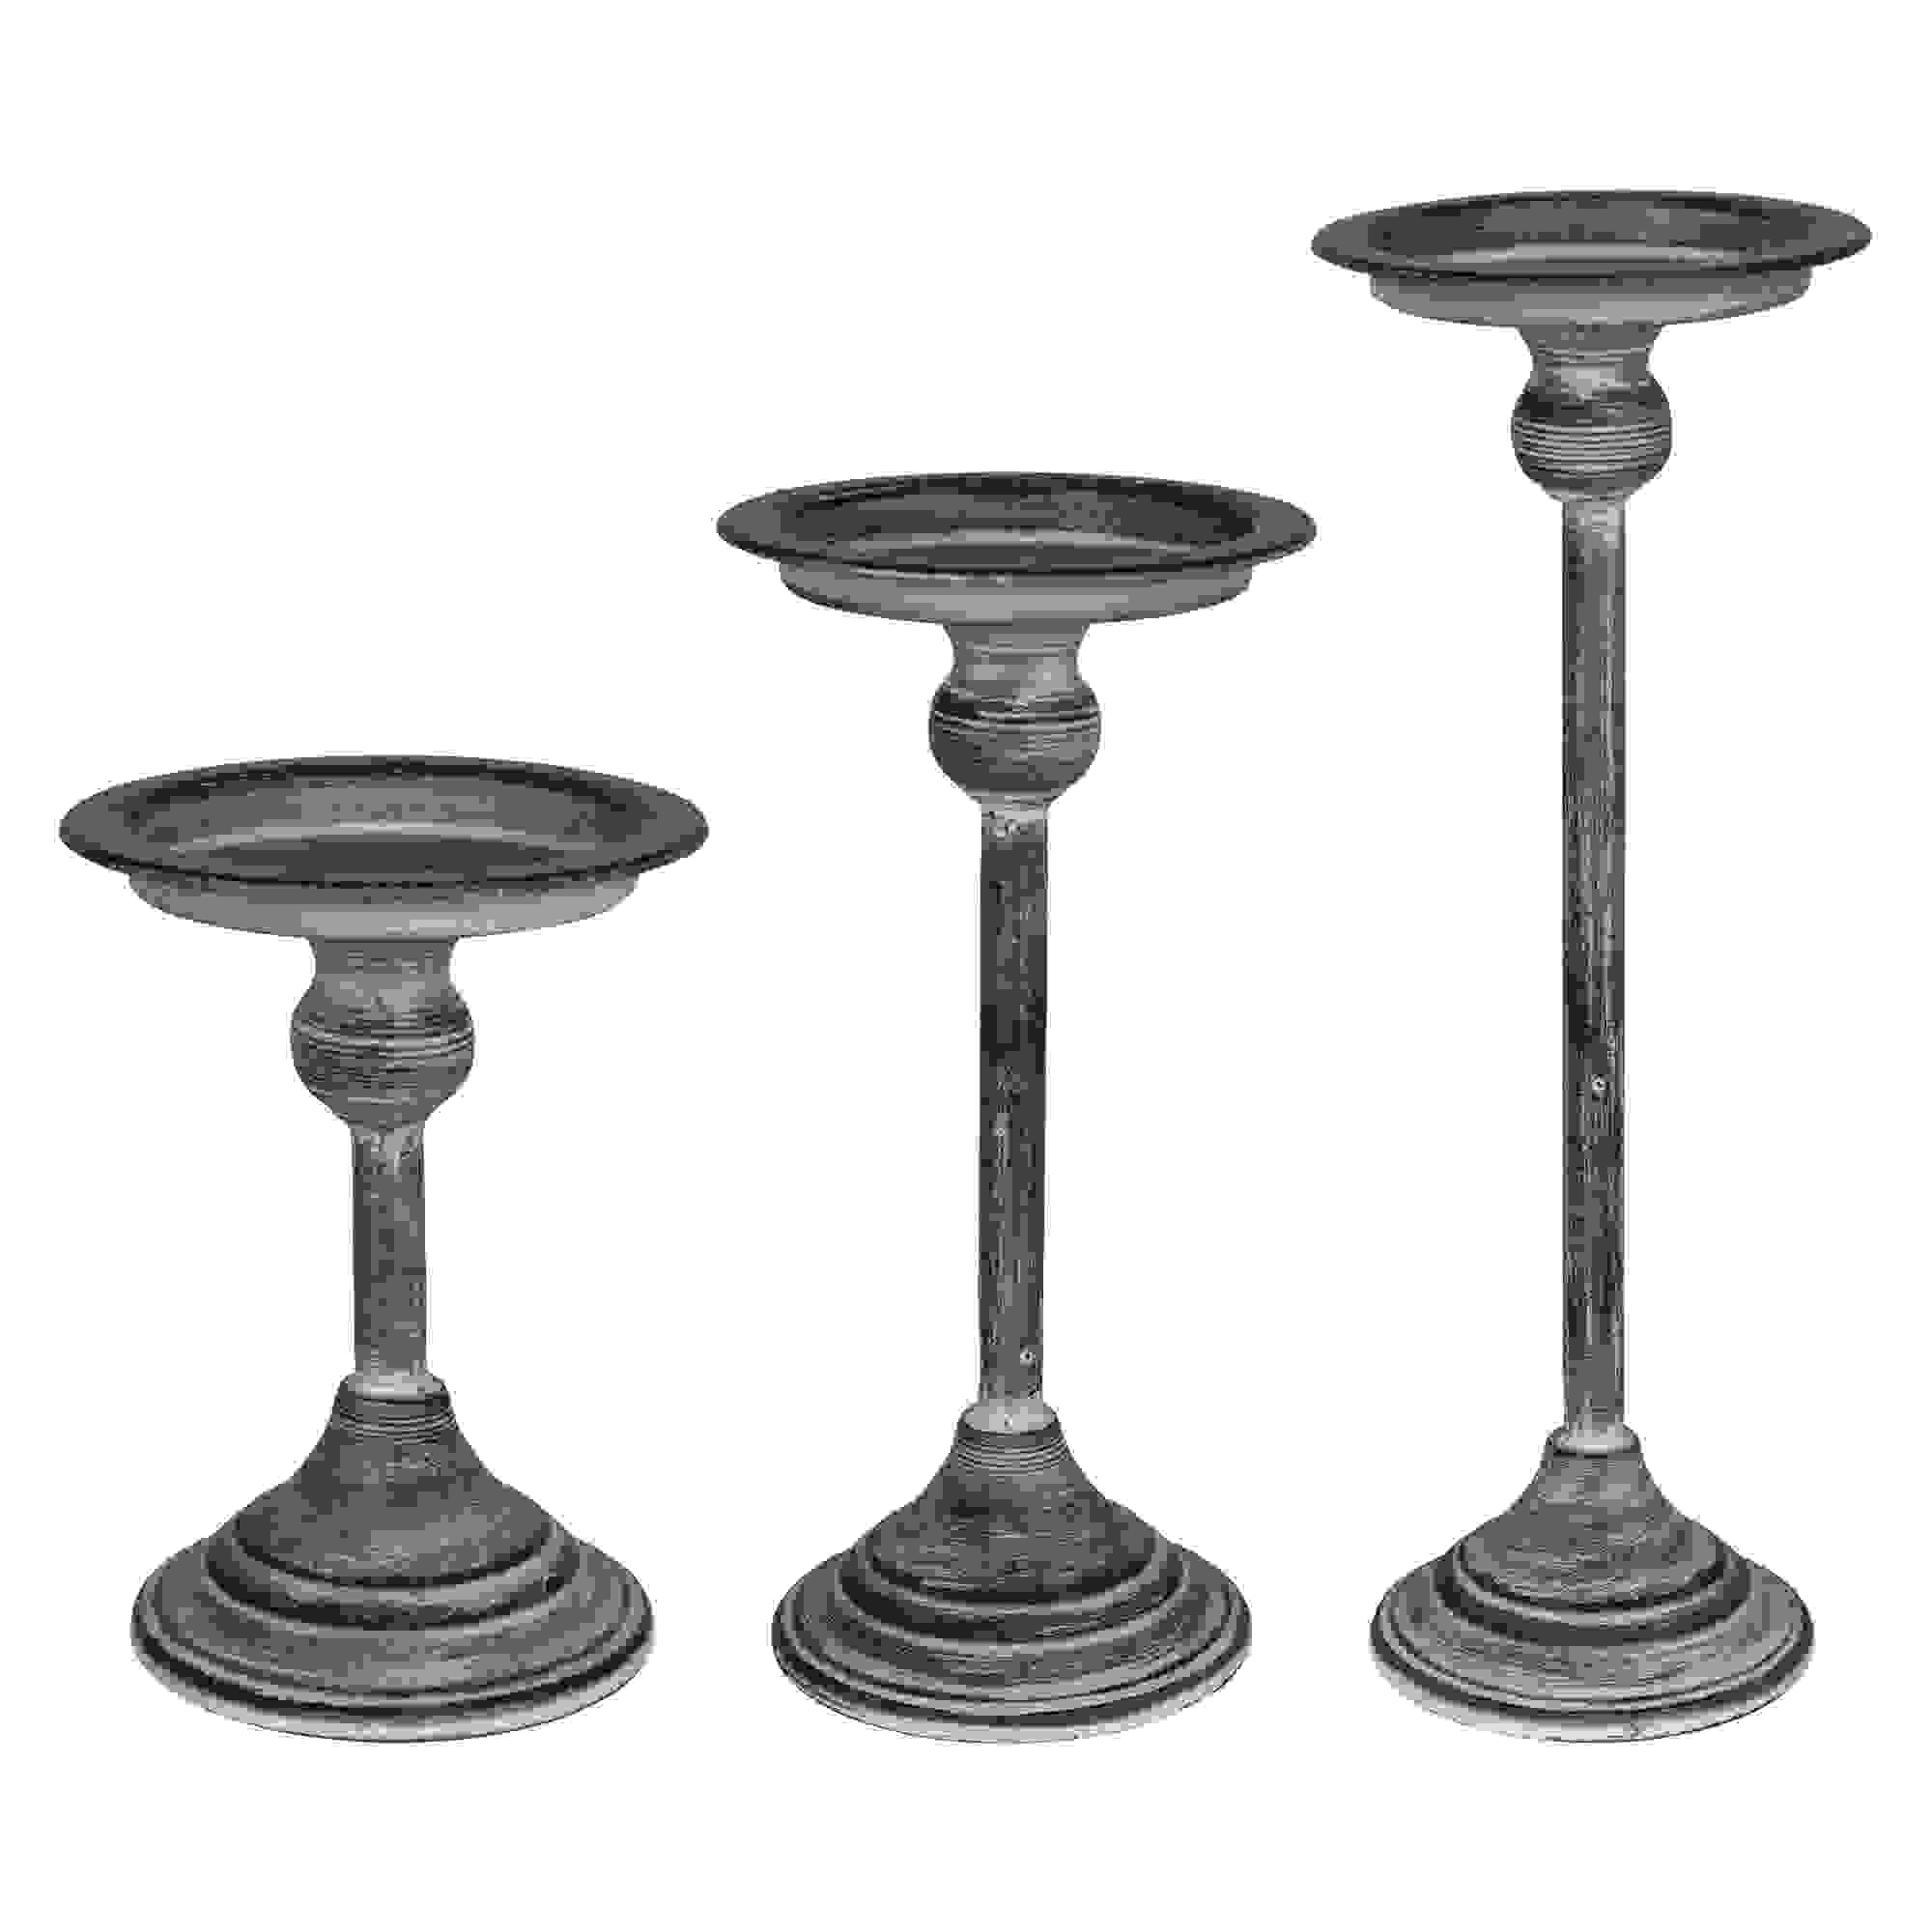 Stratton Home Decor Set of 3 Distressed Green Candle Holders